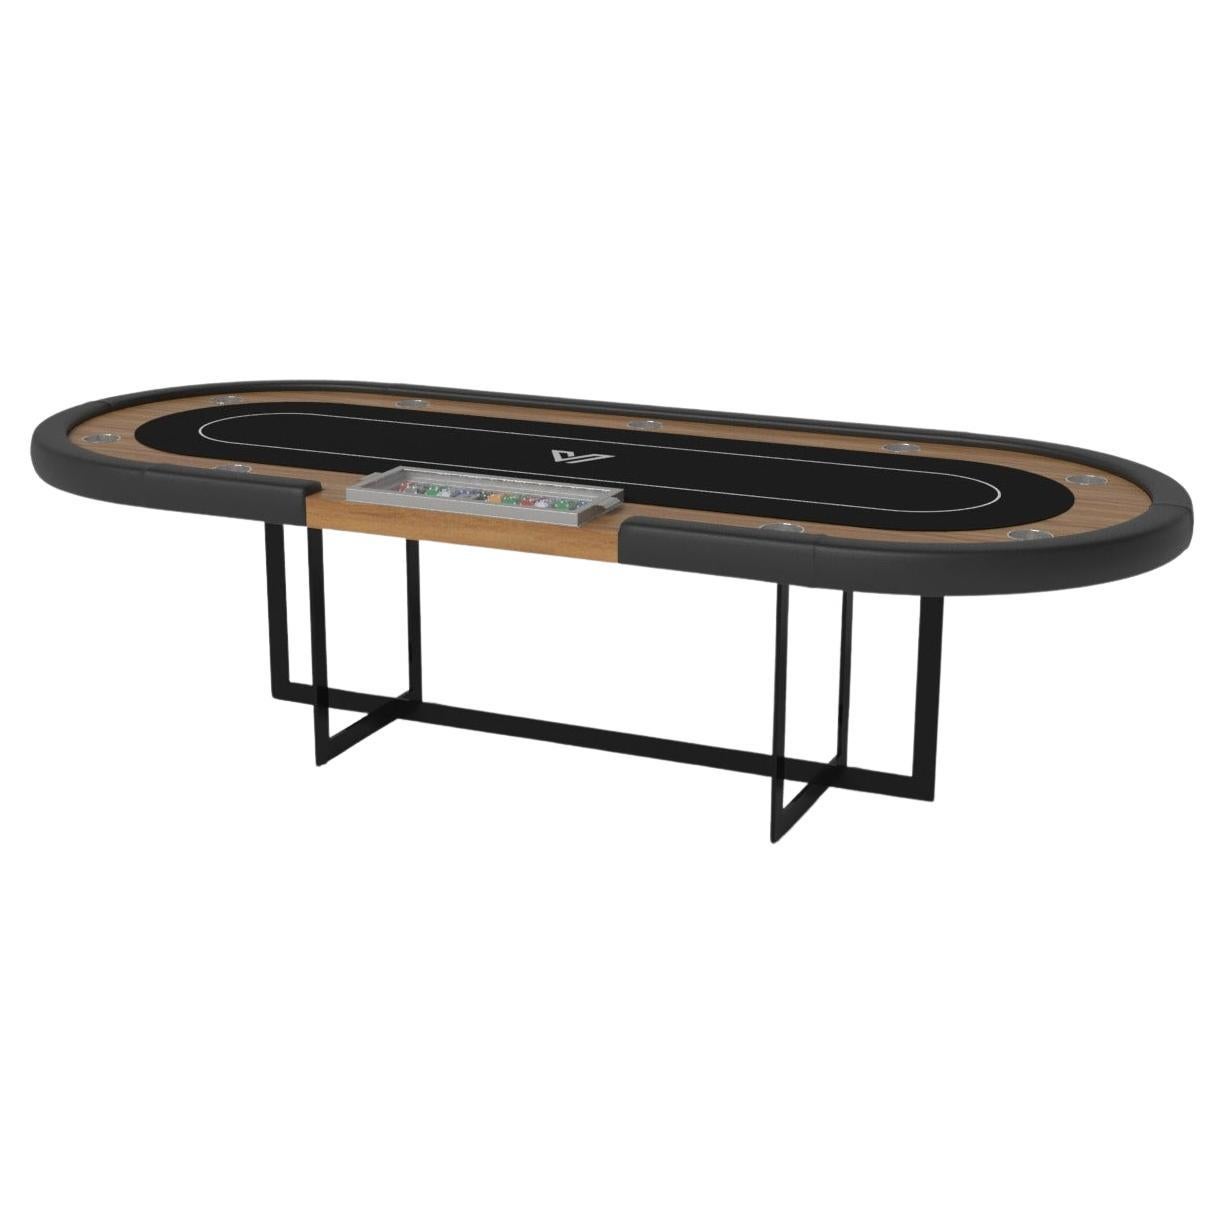 Elevate Customs Beso Poker Tables / Solid Teak Wood in 8'8" - Made in USA For Sale